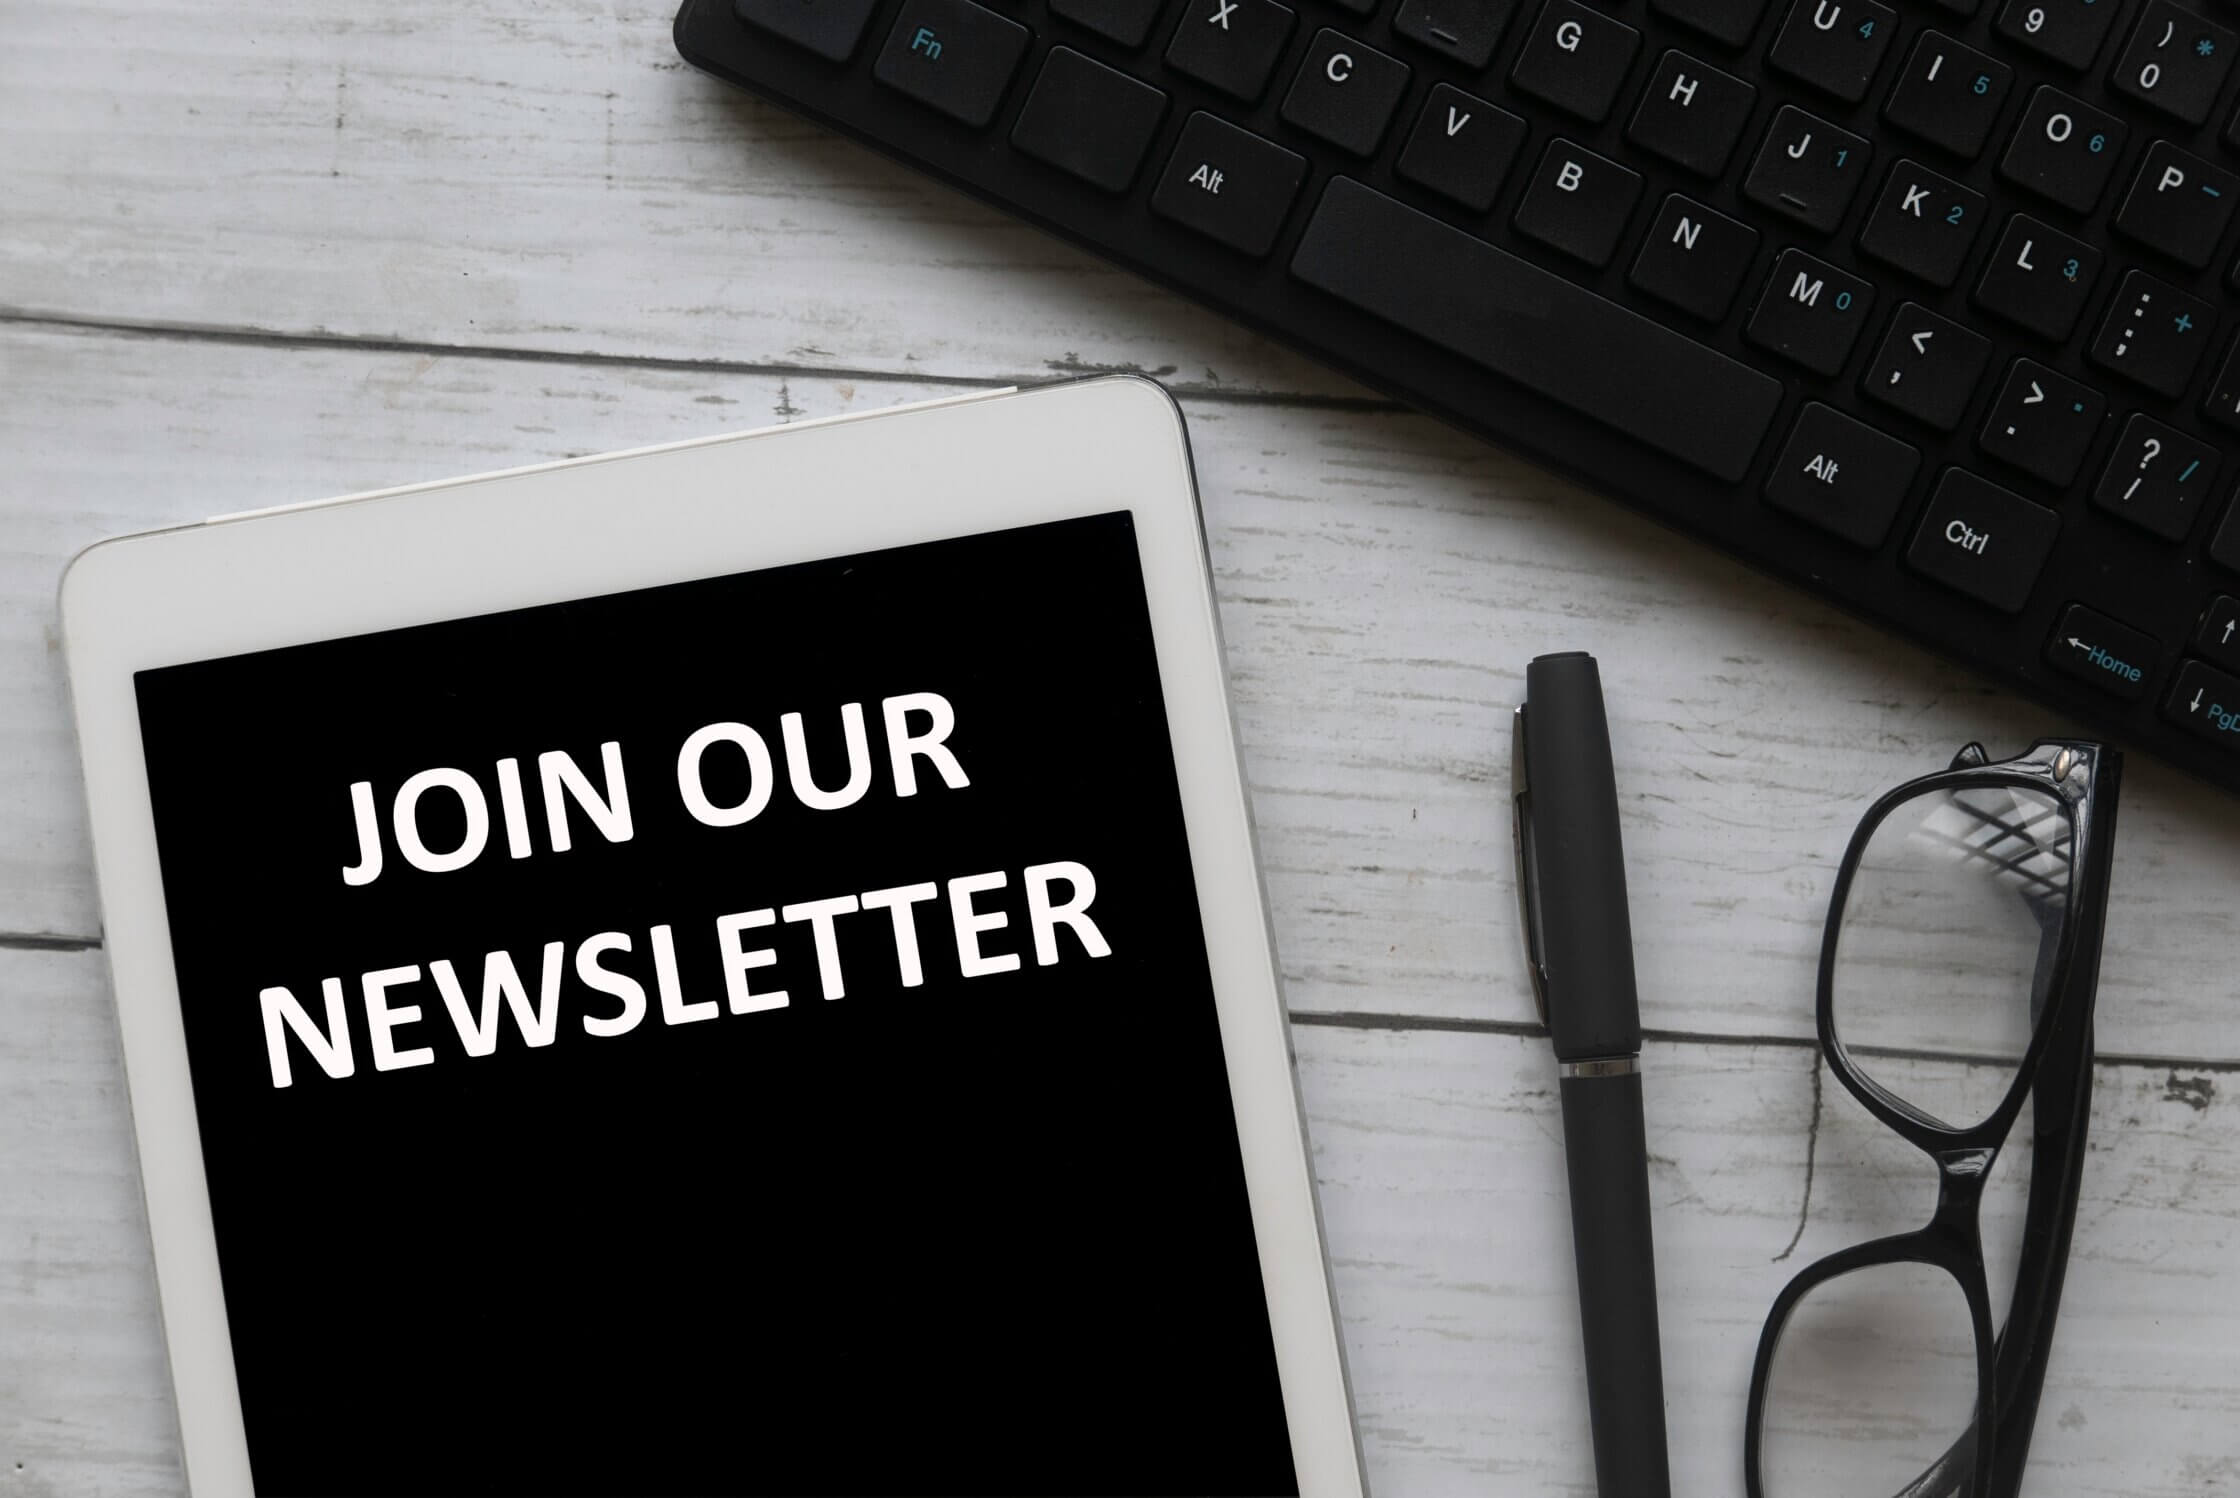 join our newsletter concept 2022 11 01 00 05 08 utc